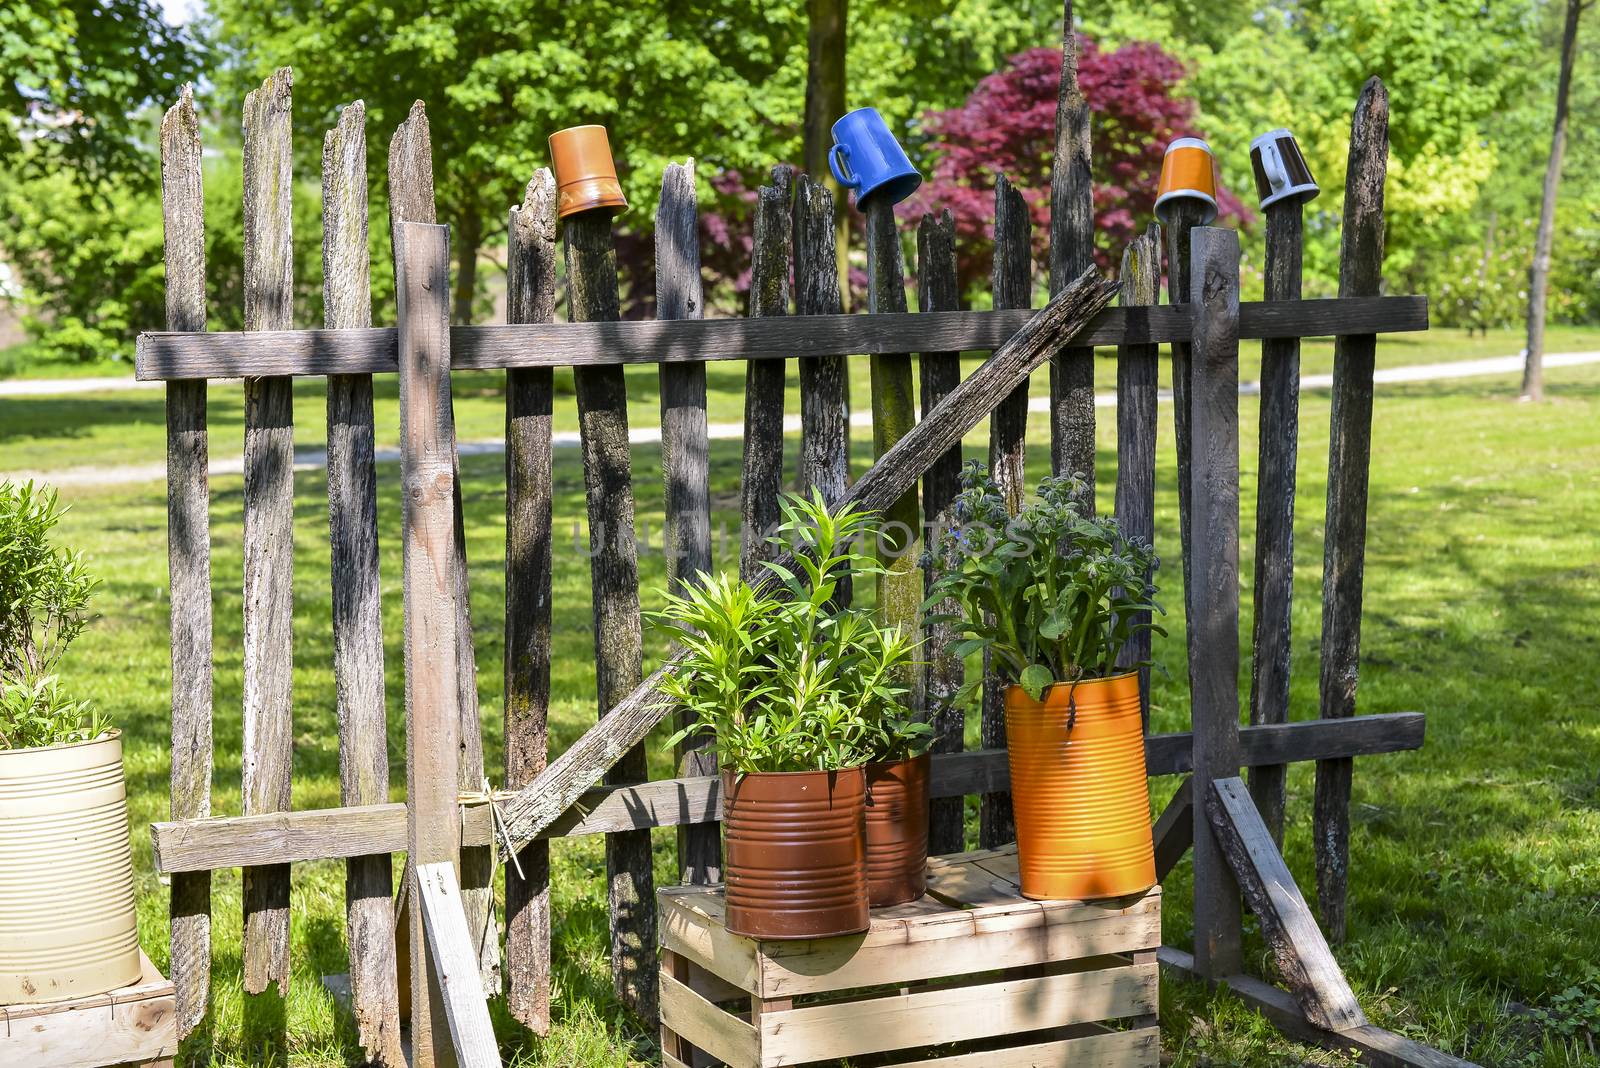 A rural wooden fence with colorful decoration